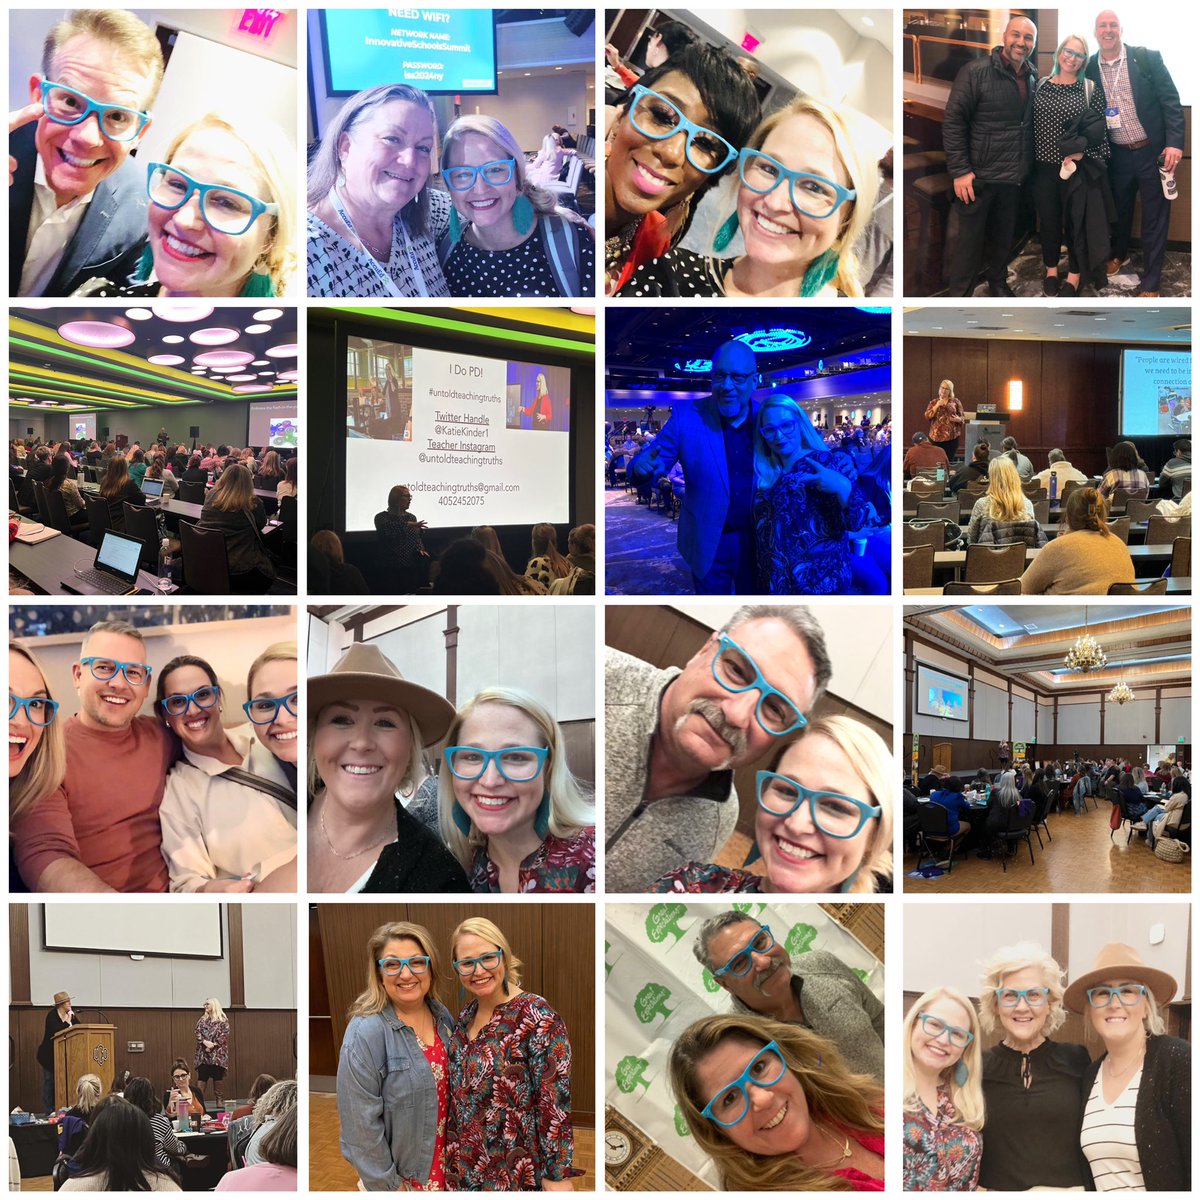 From the amazing #innovativeschoolssummit NYC to GE #greatexpectations keynote at UCO, the past 48 hours has been a whirlwind of fun and meaningful connections.  I’m grateful. #katiekinderfromokc #untoldteachingtruths #edutwitter